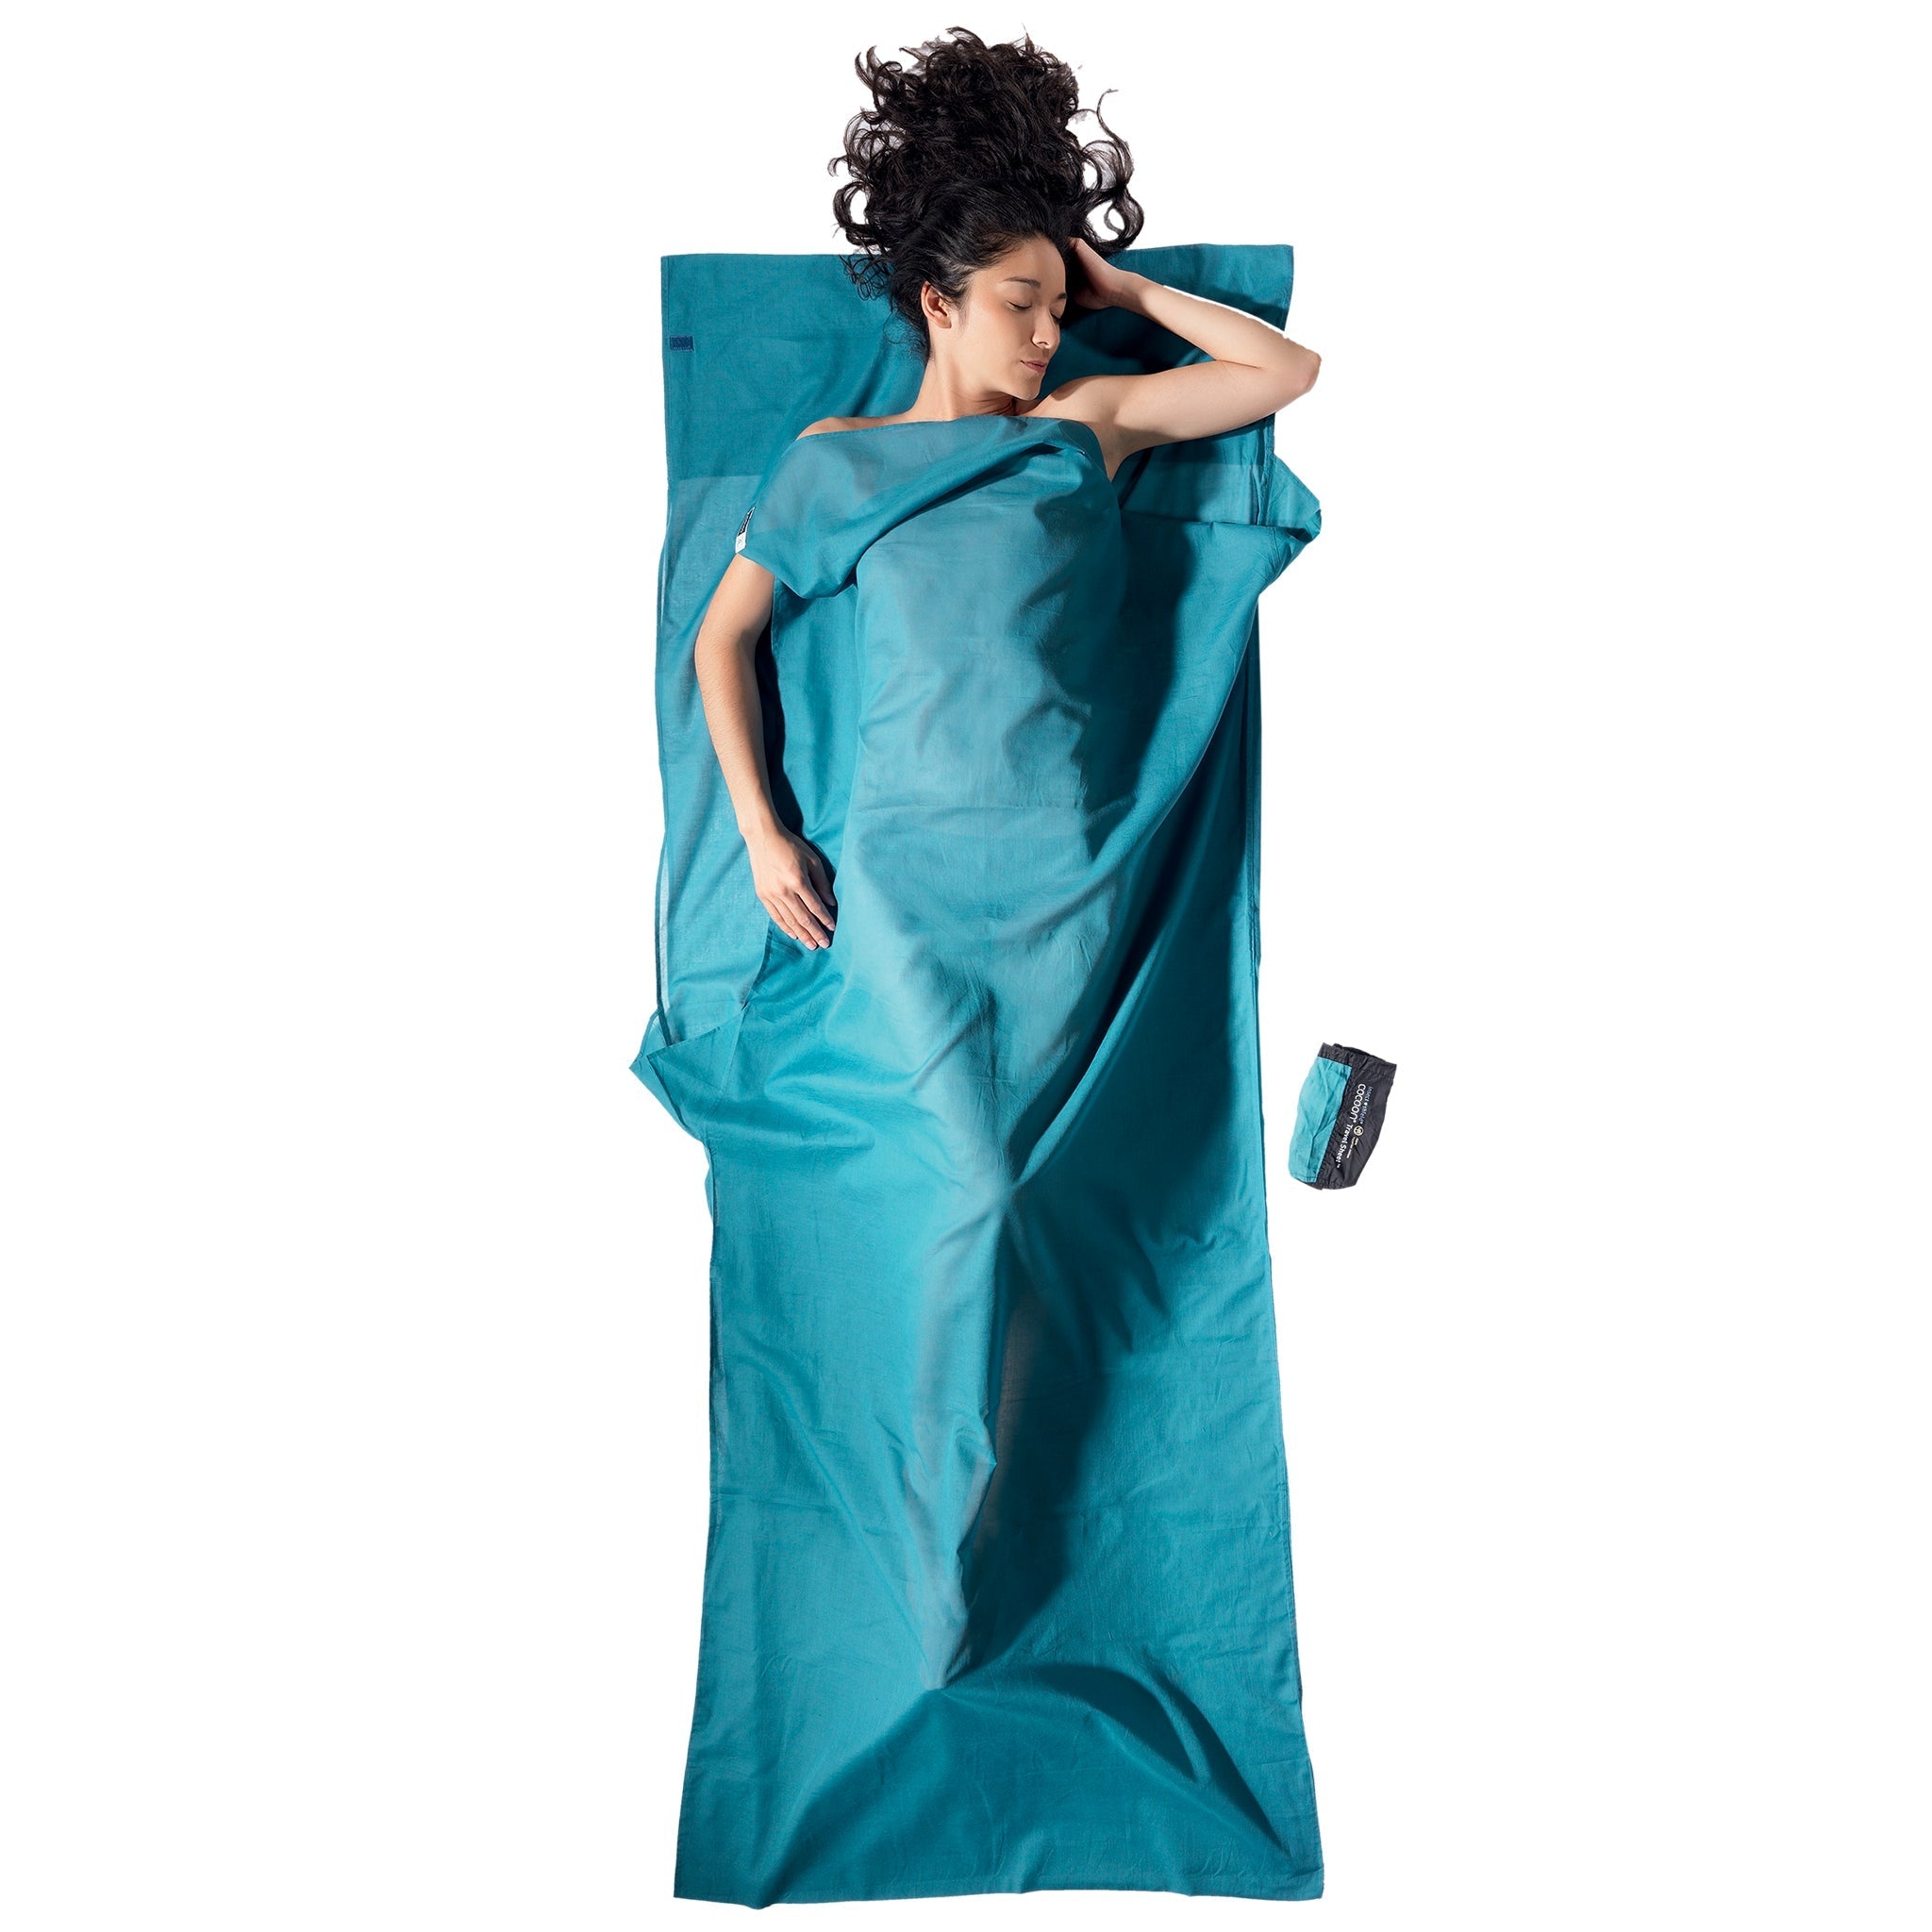 Insect Shield Travel Sheet by Cocoon > Camino Comfort